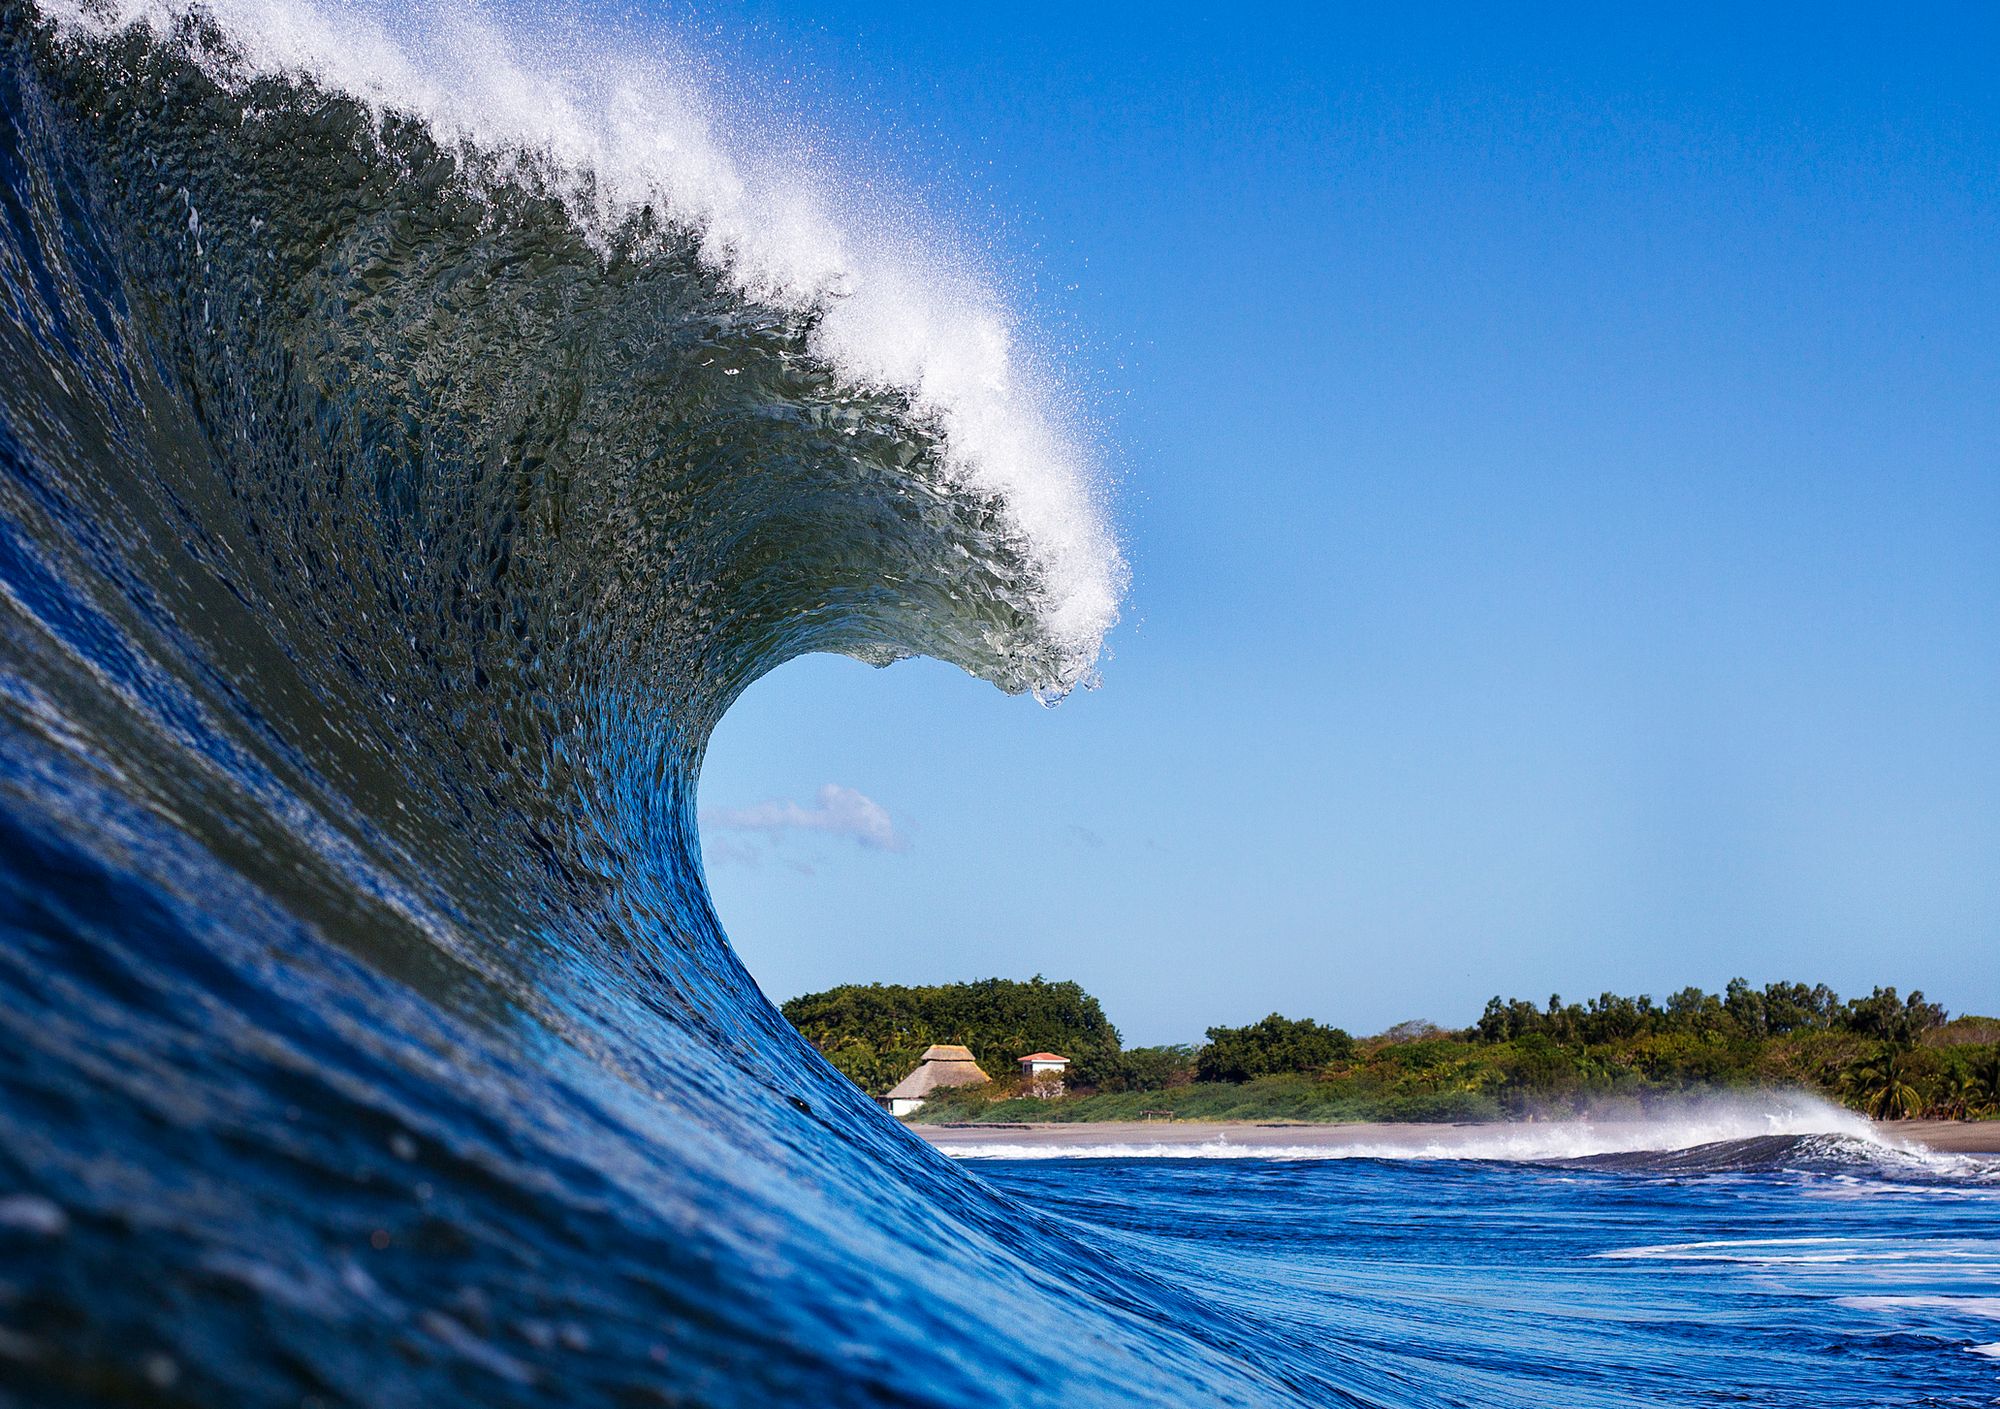 looking into a righthand tube in Nicaragua, one of the best surf spots in June